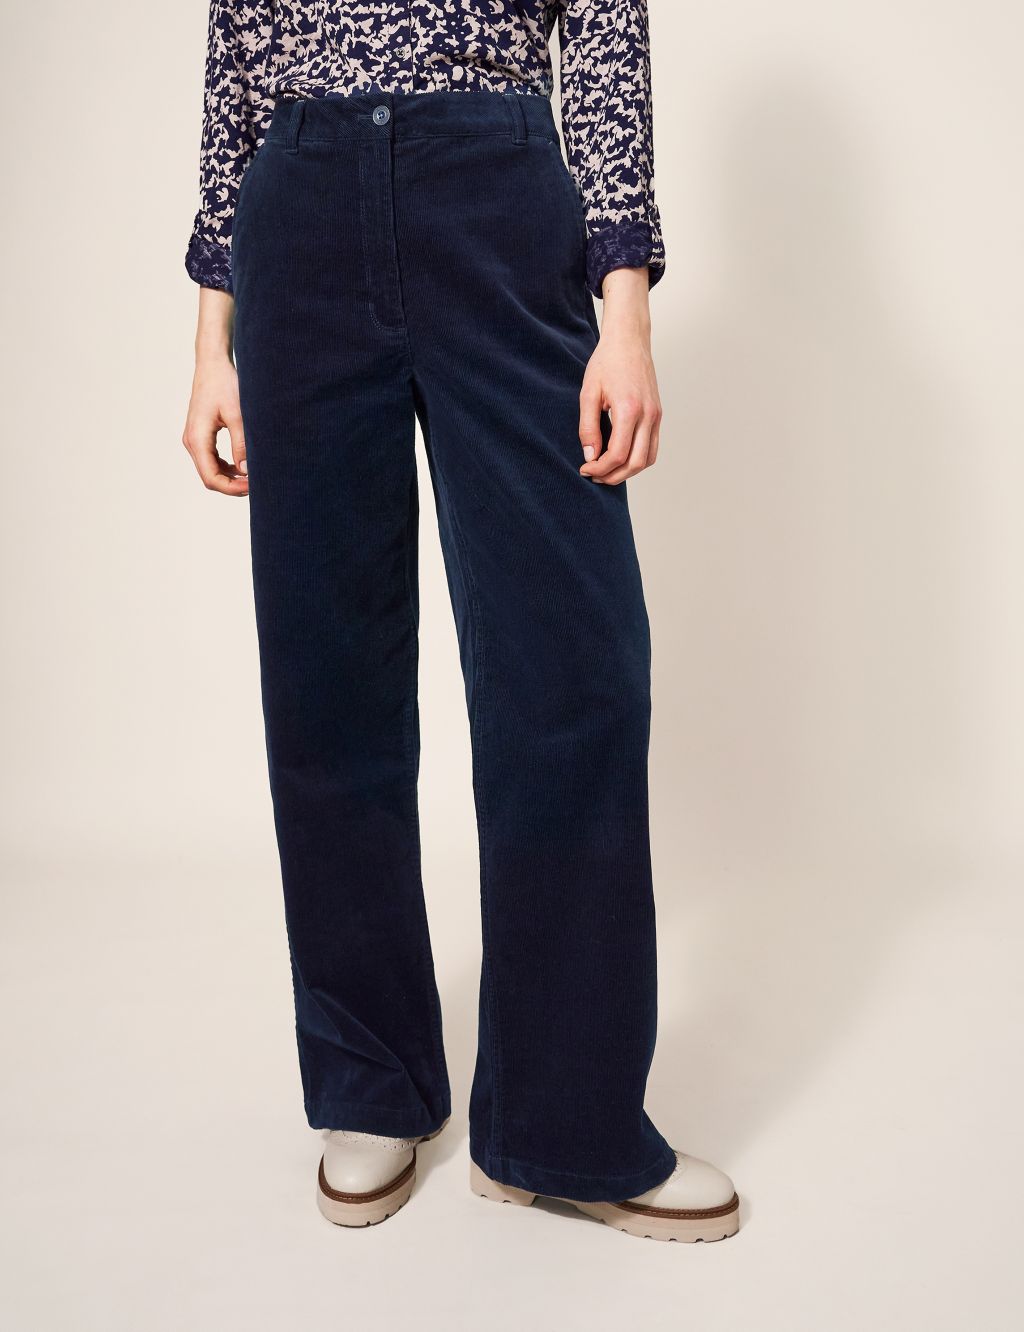 Cord Wide Leg Trousers image 1